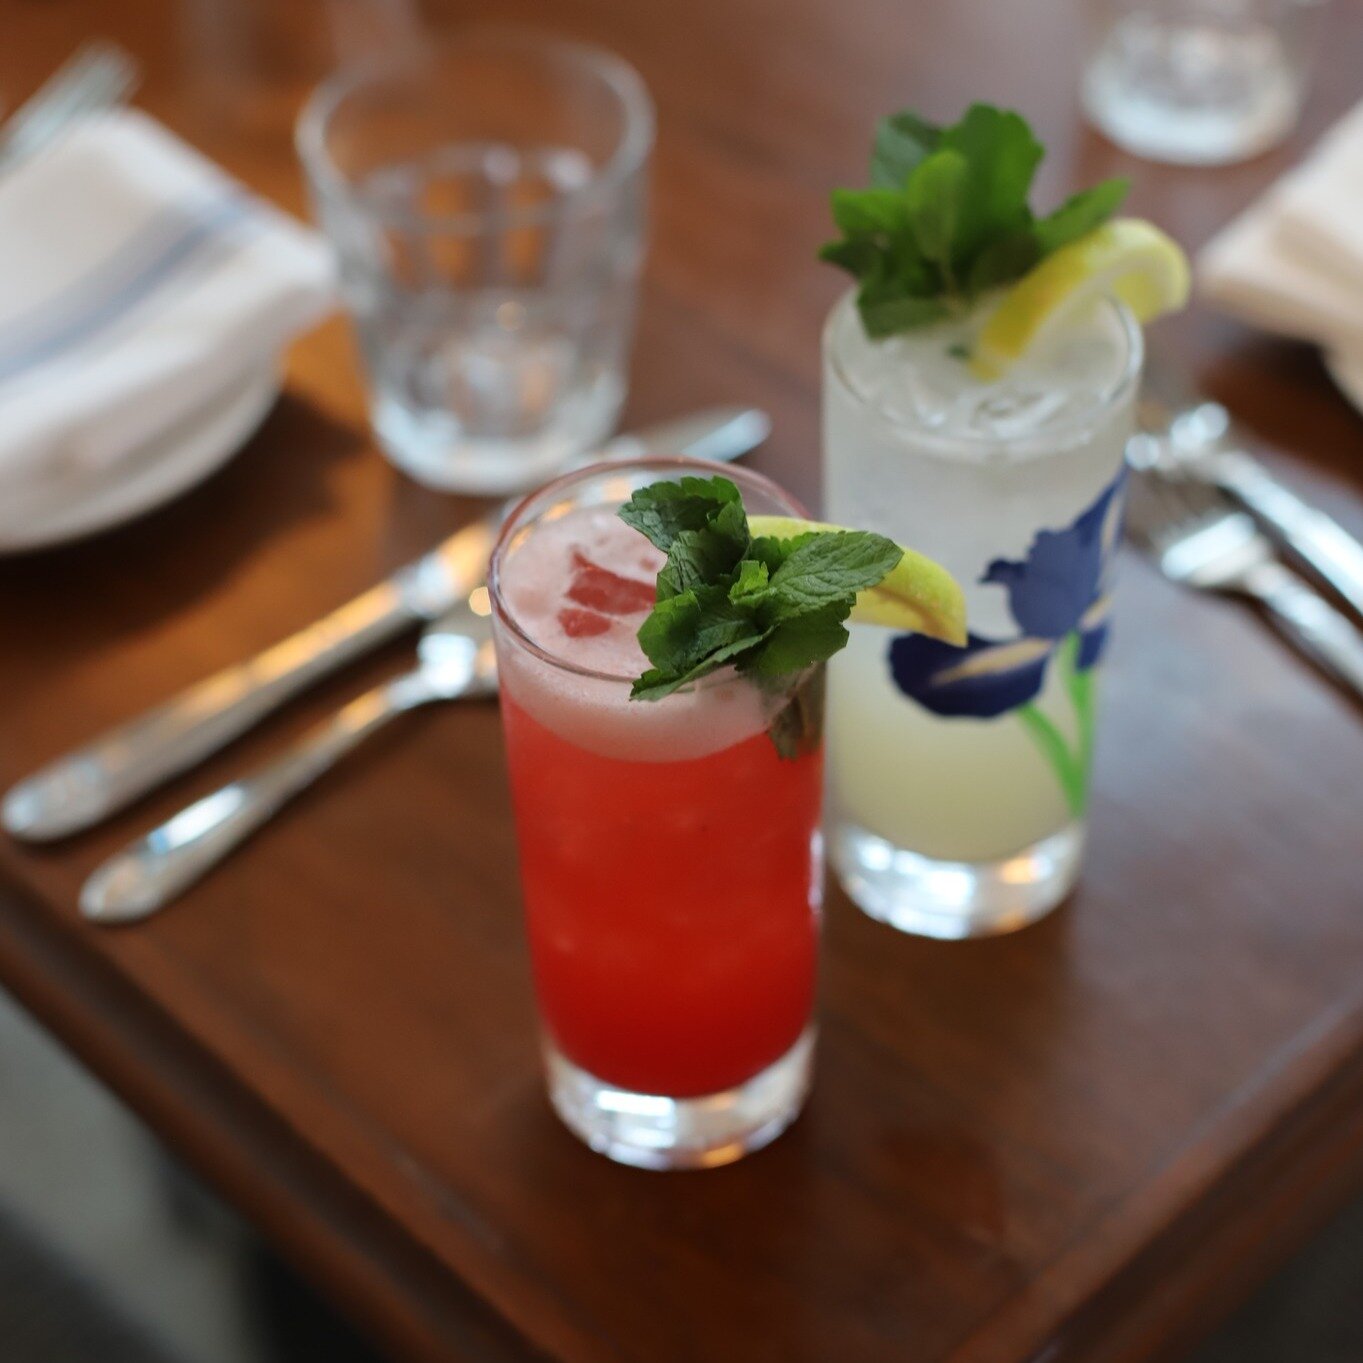 The perfect pairing to your lunch - one of our delicious mocktails. Sit, sip &amp; enjoy while we wish for warmer weather.